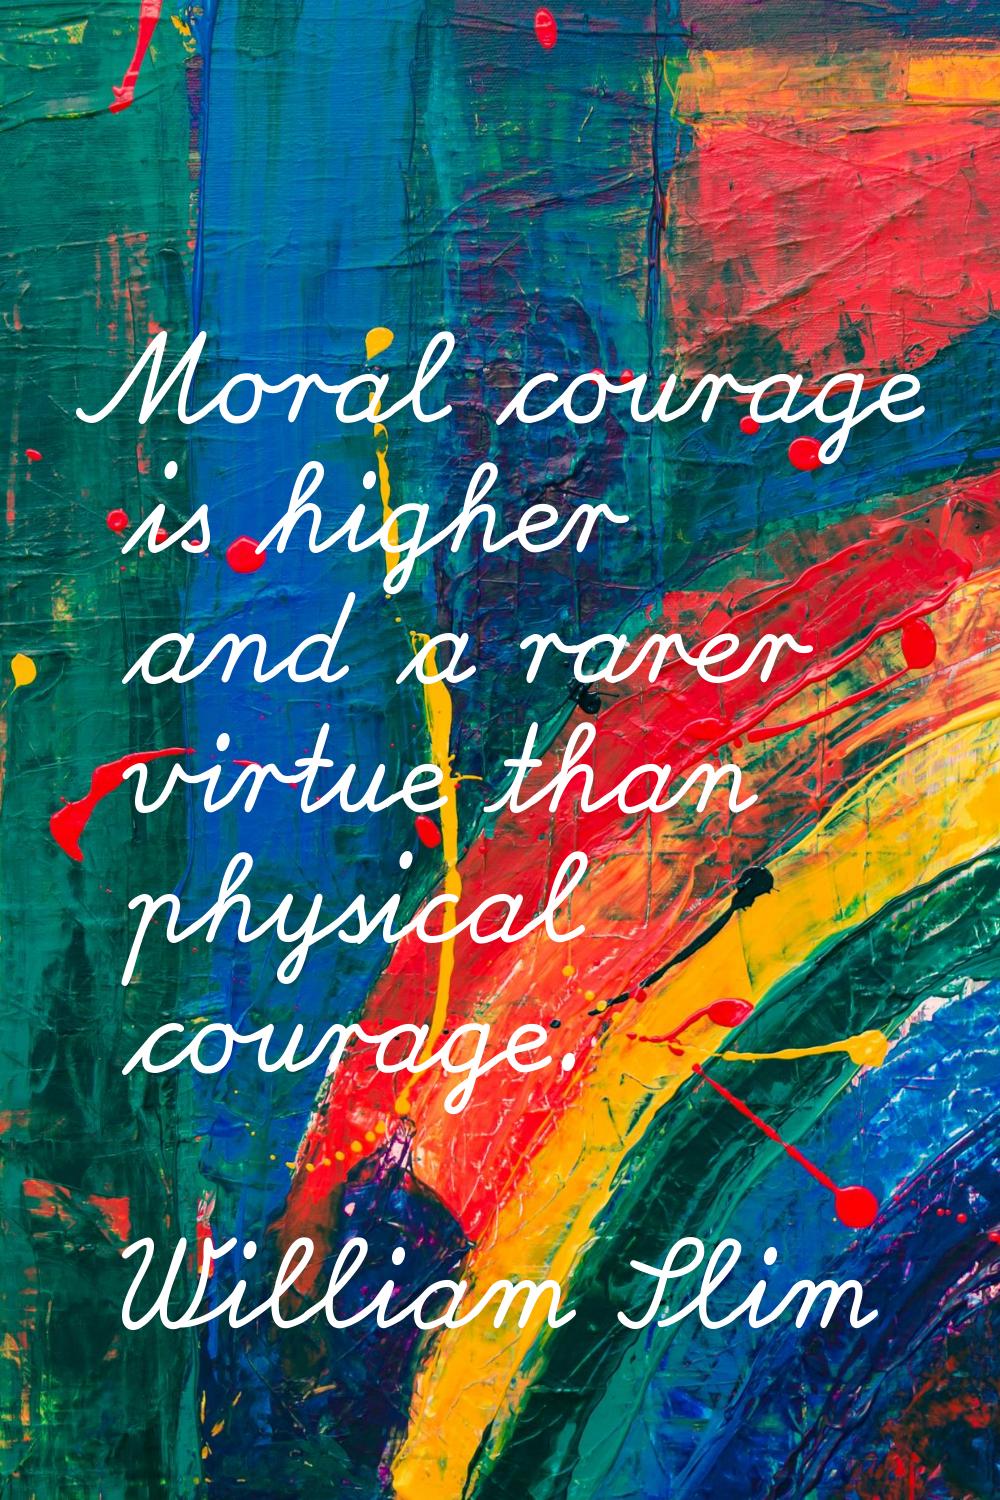 Moral courage is higher and a rarer virtue than physical courage.